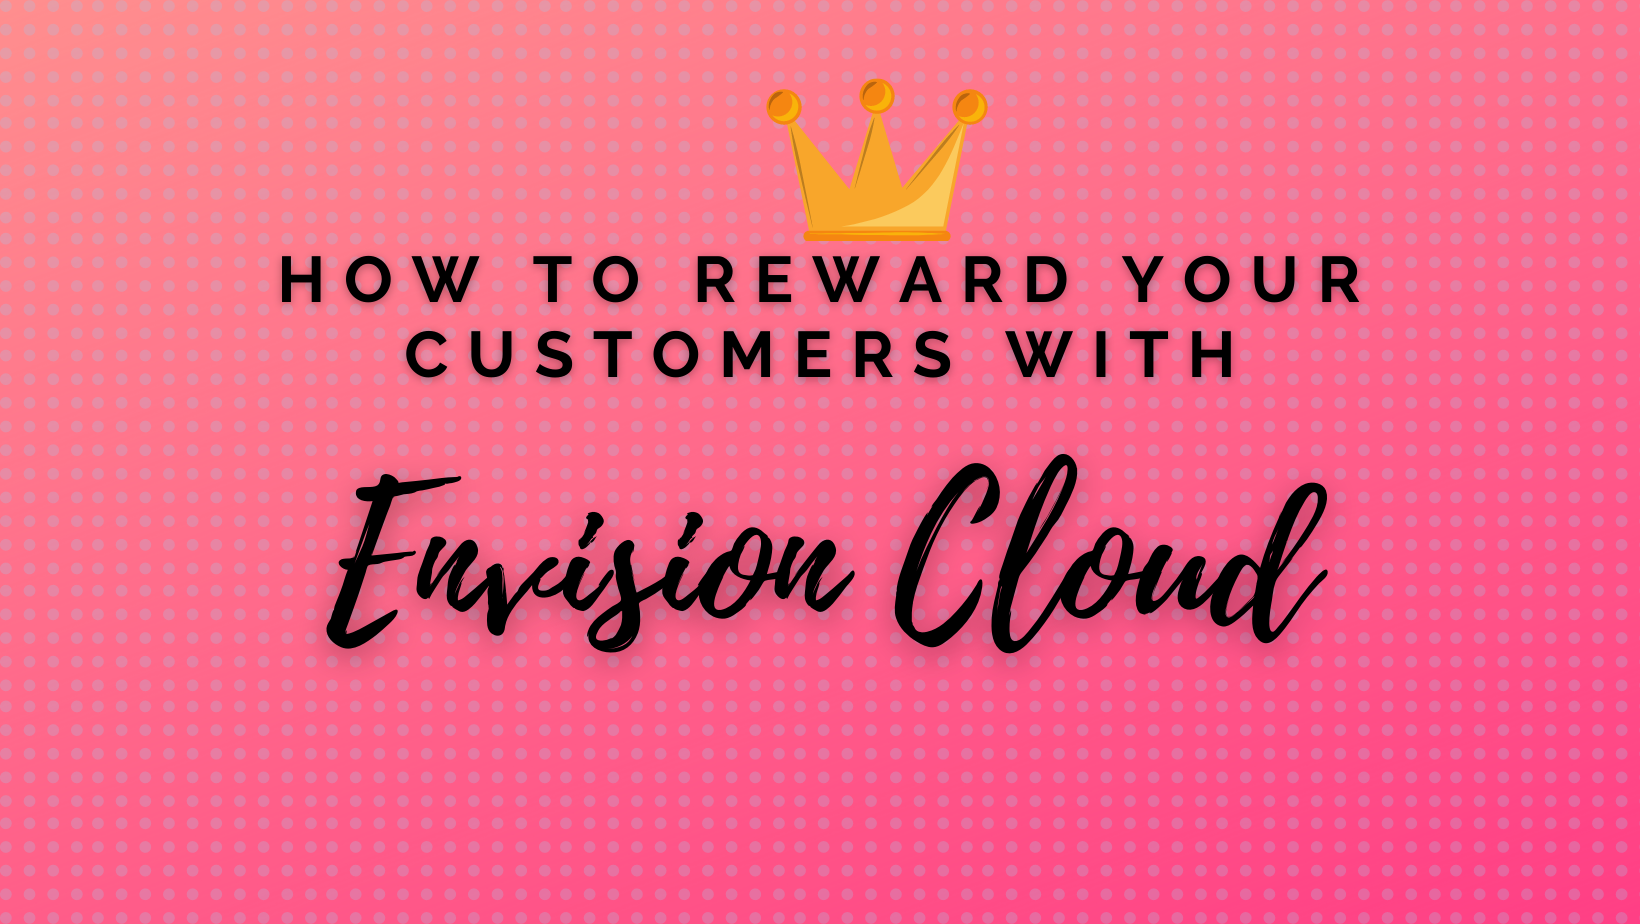 how to reward your customers graphic with crown